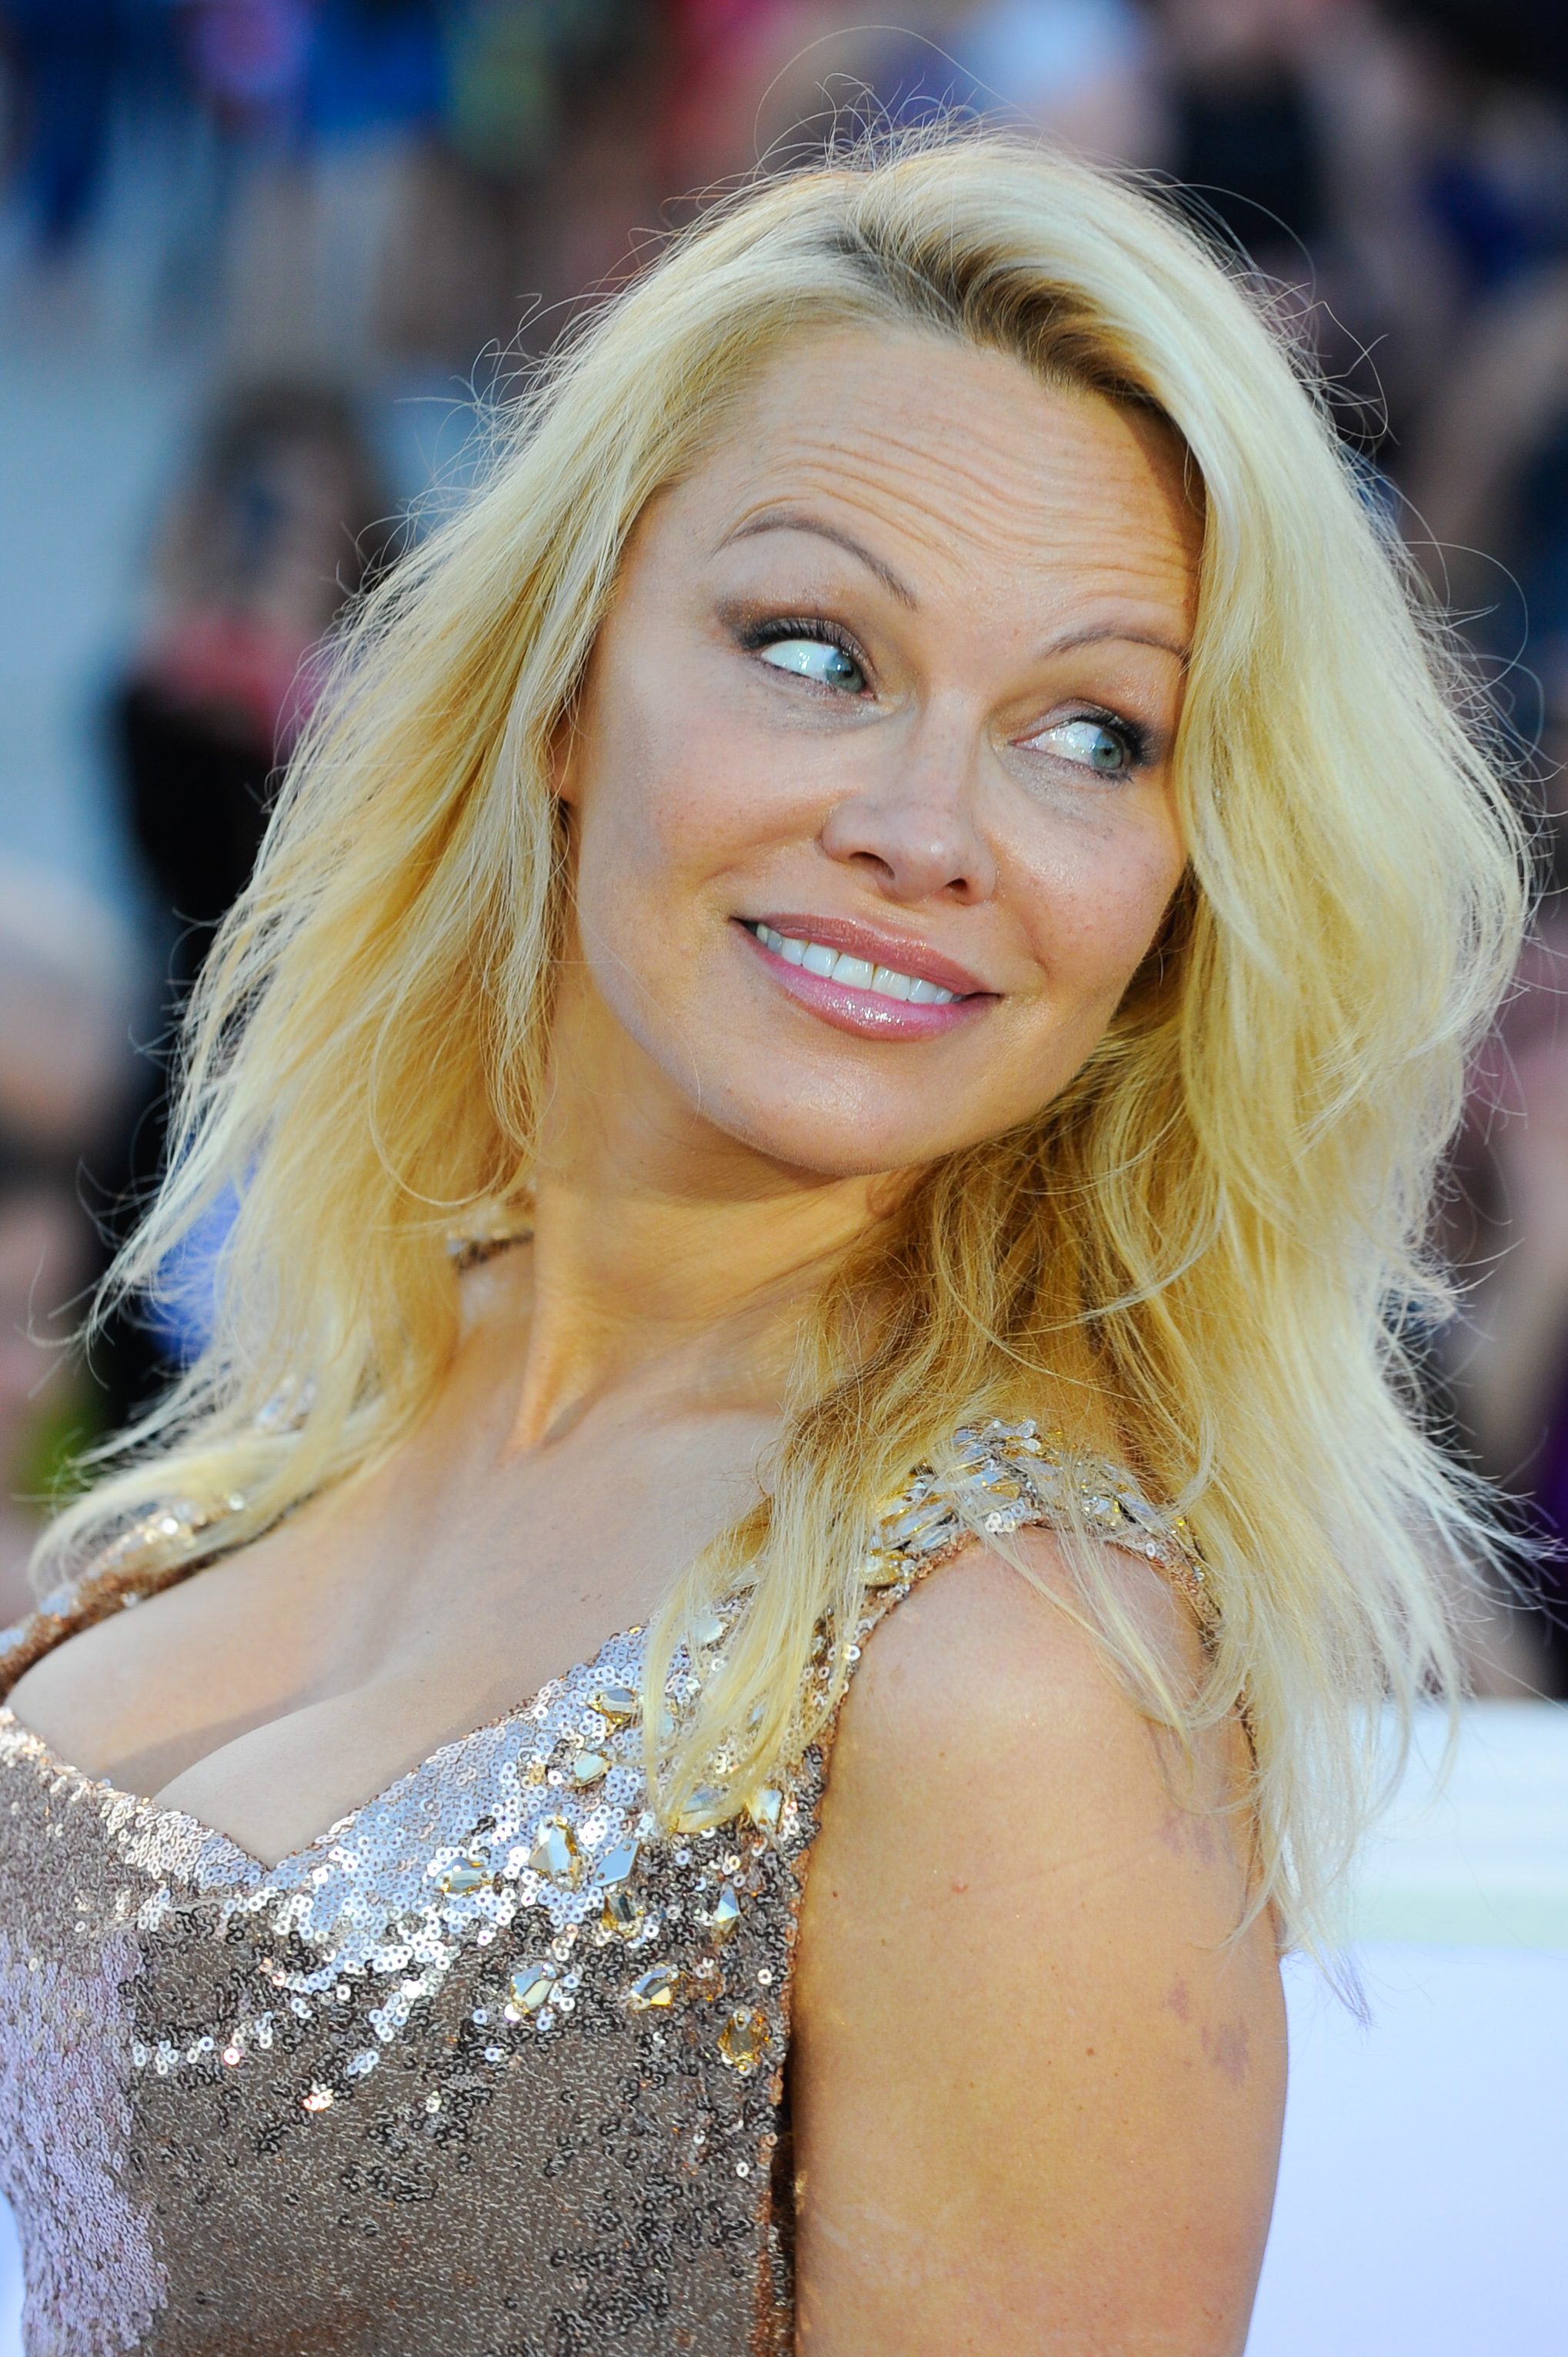 Pamela Anderson attends Paramount Pictures' World Premiere of "Baywatch" in Miami Beach, Florida, on May 13, 2017. | Source: Getty Images